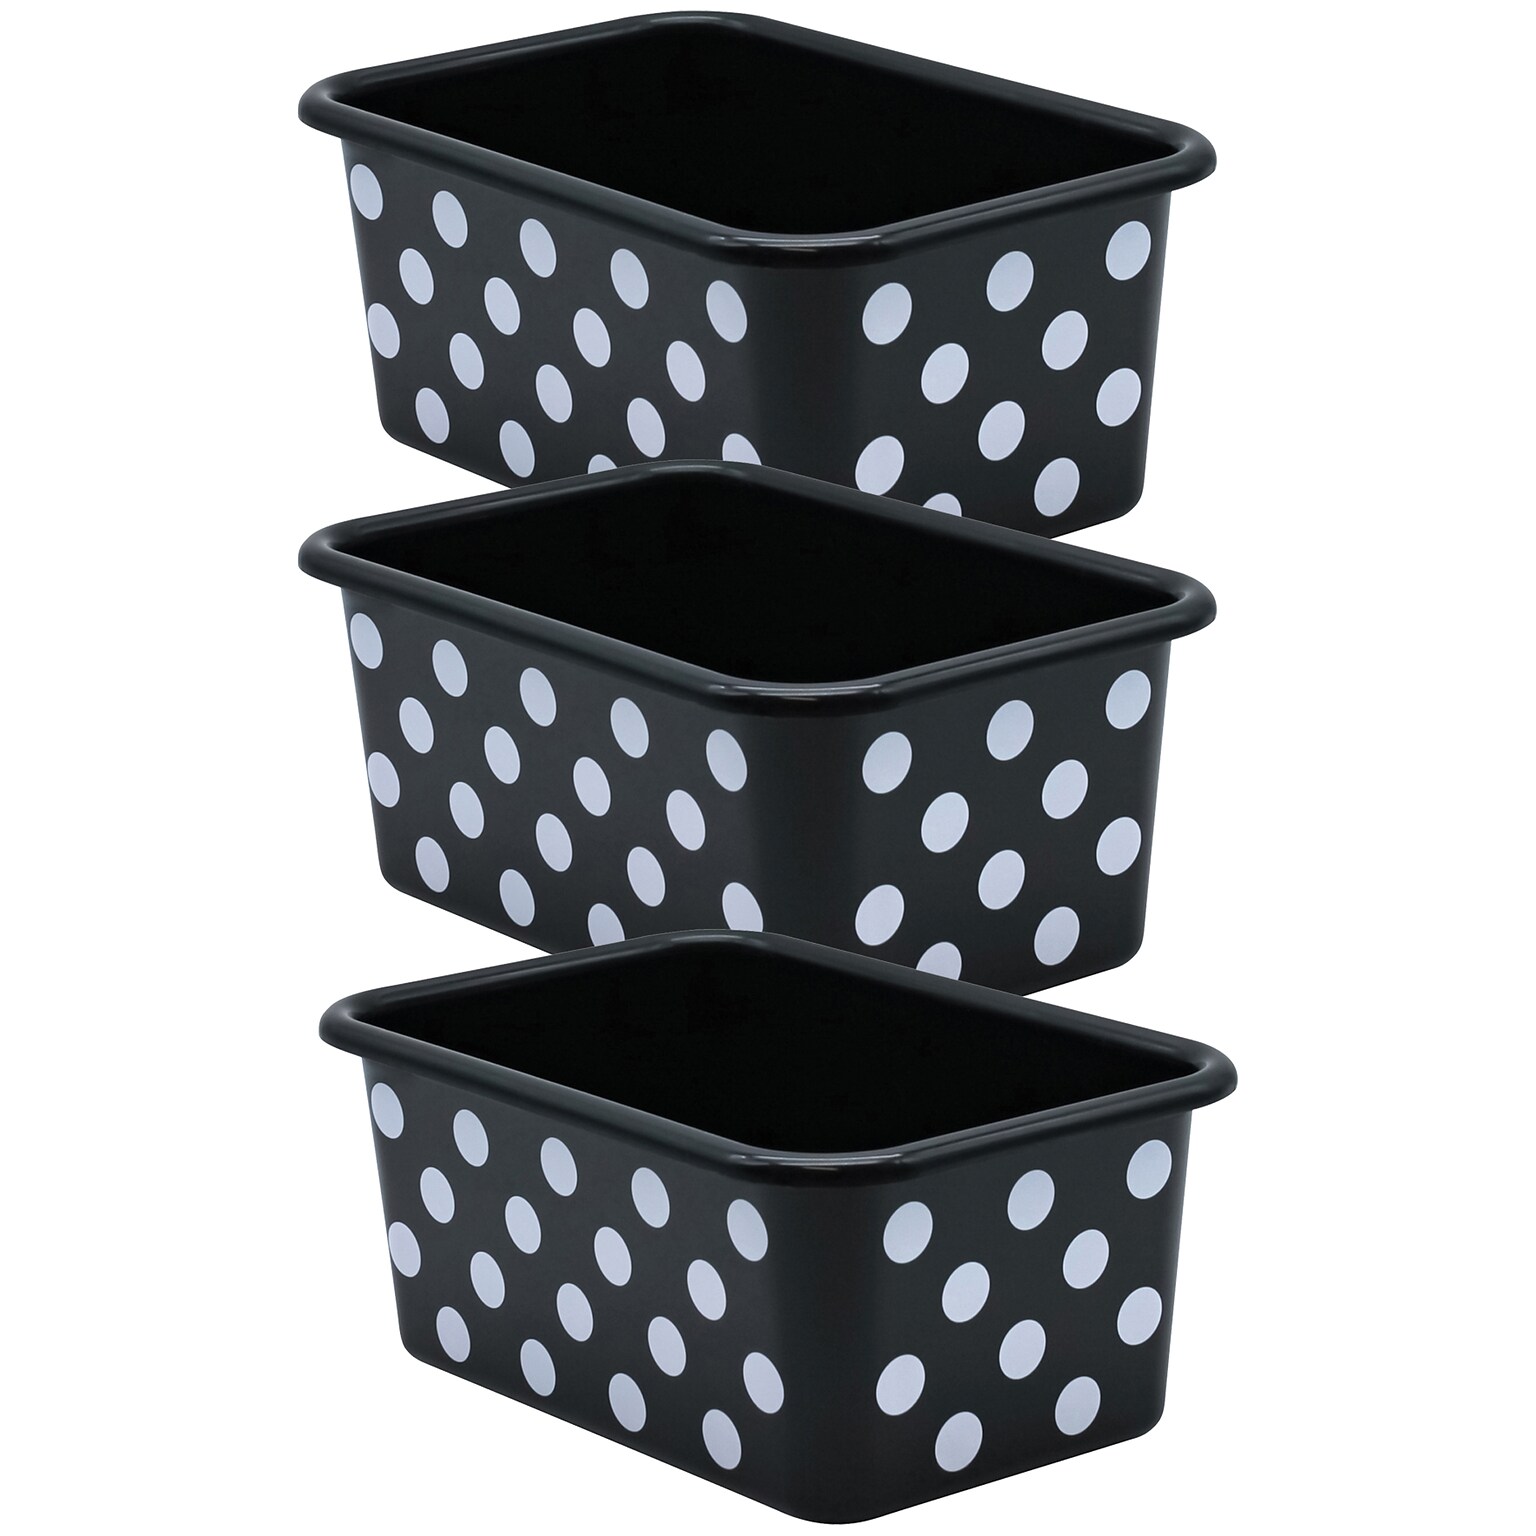 Teacher Created Resources® Plastic Storage Bin, Small, 7.75 x 11.38 x 5 , White Polka Dots on Black, Pack of 3 (TCR20402-3)